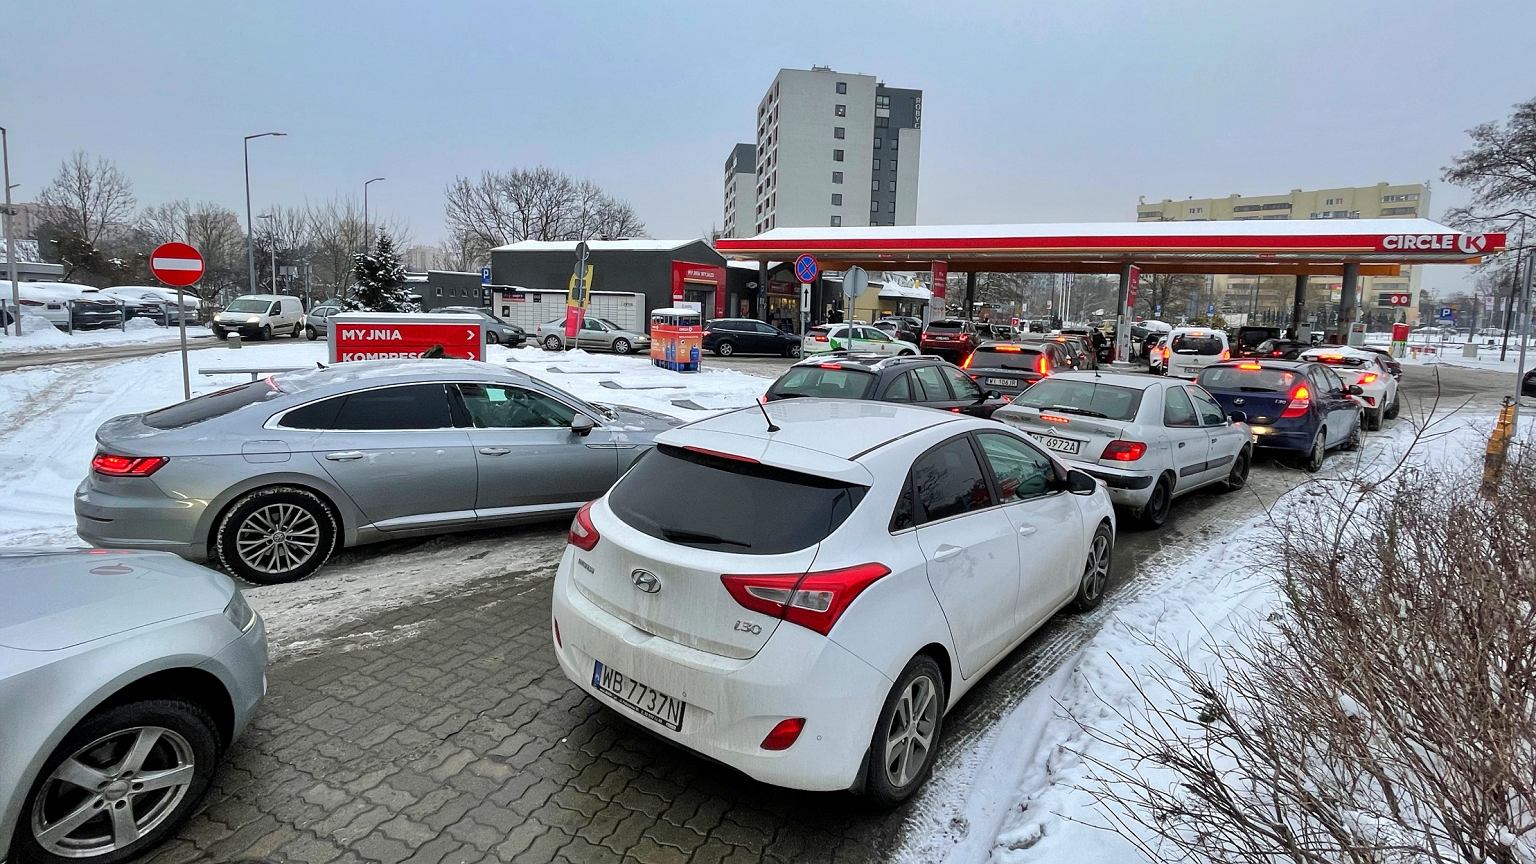 Siege of Circle K station. Drivers hurried to get PLN 1 cheaper fuel per liter.  I'll do it